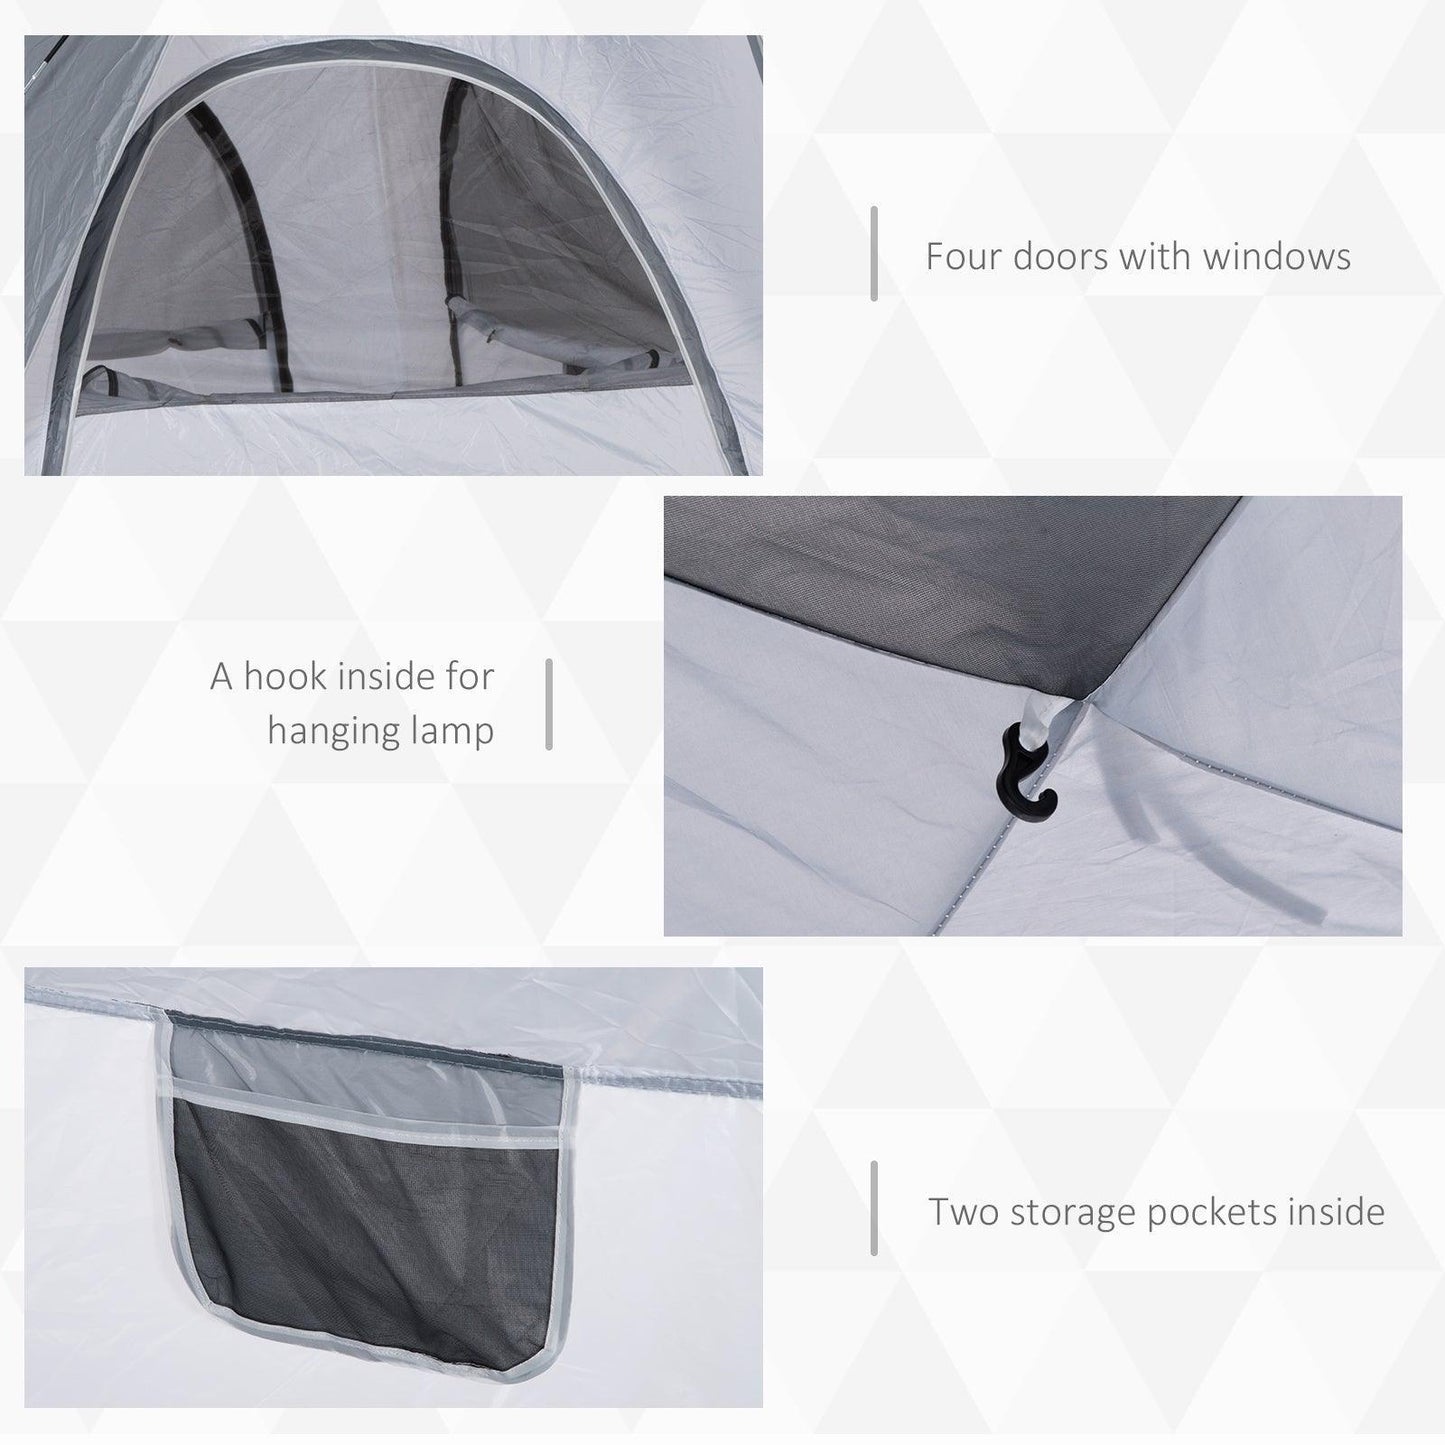 Outsunny Camping Tent: 4-Person Auto Pop-Up, Lightweight & Portable - ALL4U RETAILER LTD